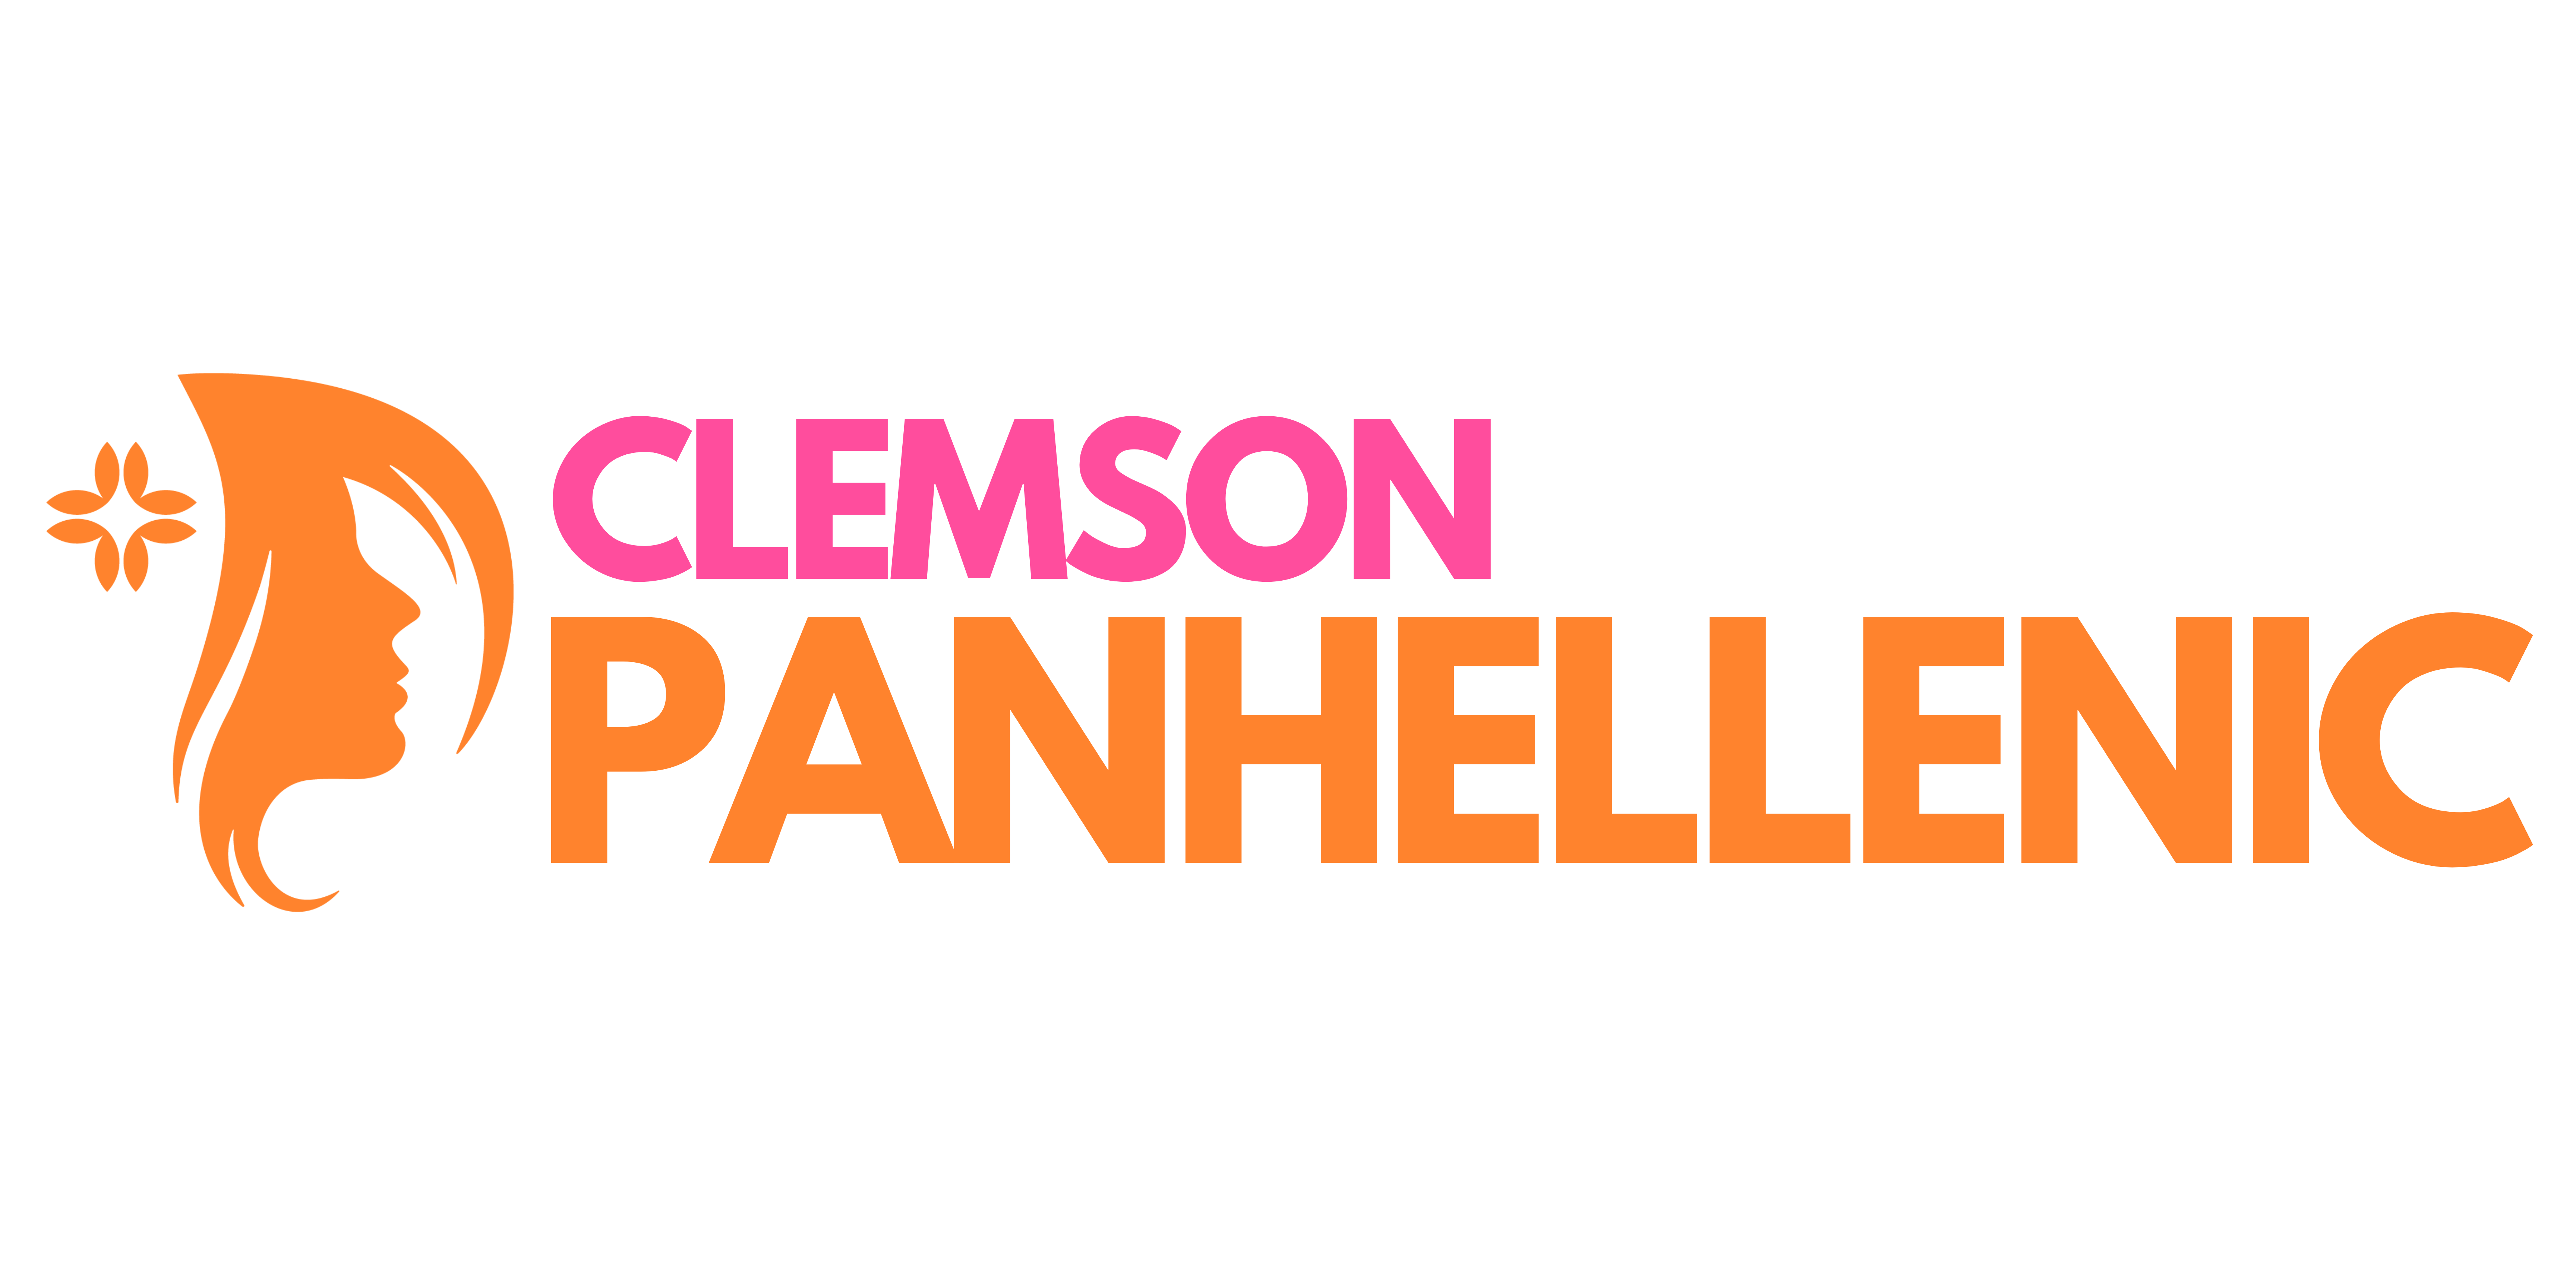 Clemson Panhellenic is comprised of 13 National Panhellenic Conference chapters with over 4,000 members. Each chapter is unique, but all are united by core values of scholarship, sisterhood, leadership and service, helping women exceed their potential.